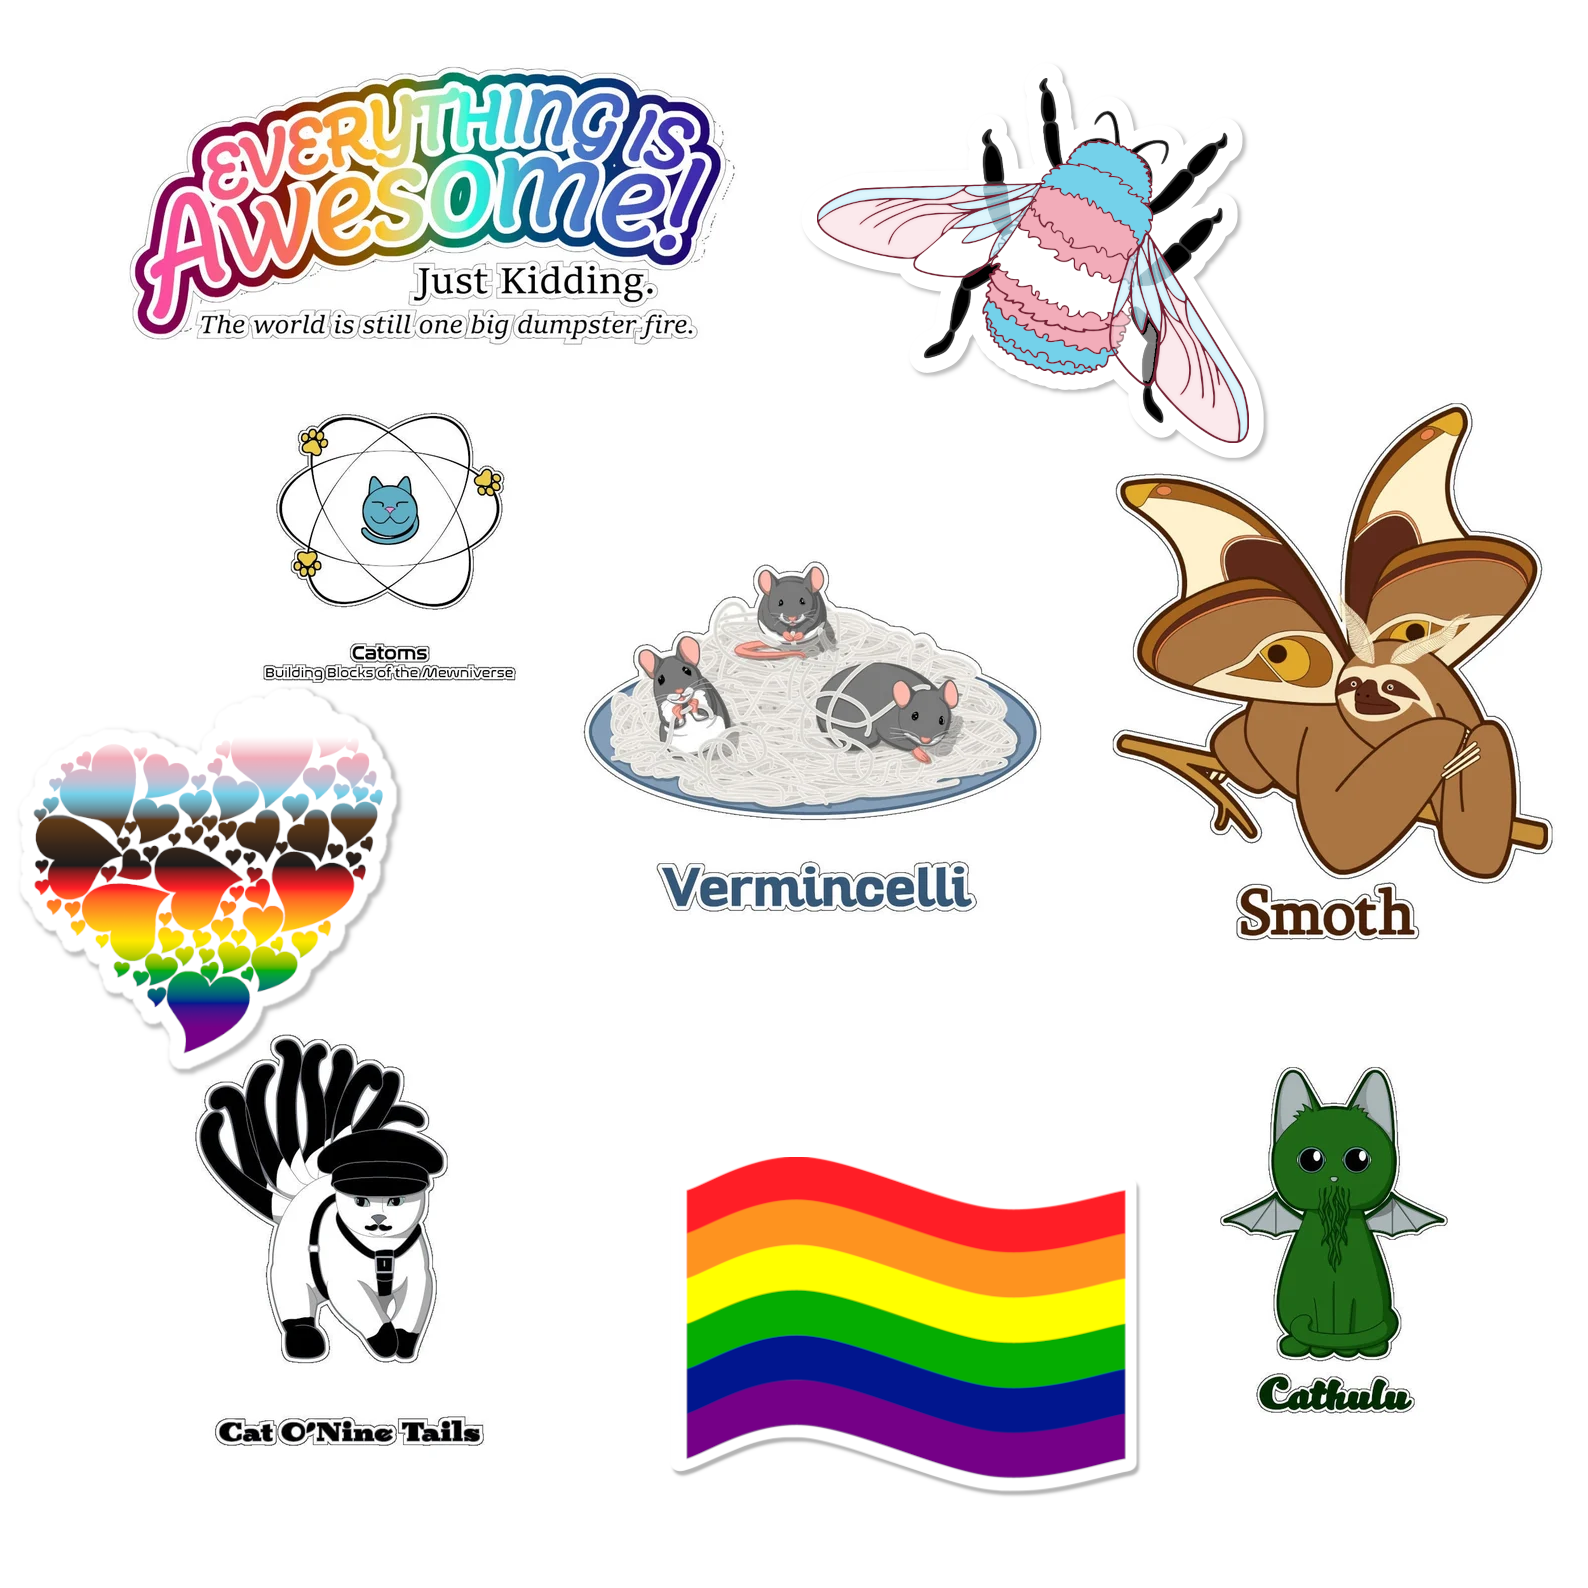 Image of assort'd vinyl stickers: Everything is Awesome!, Transgender bumblebee, Catoms, Vermincelli, Smoth, Queer heart of hearts, Cat o Nine Tails, Rainbow flag, and Cathulu